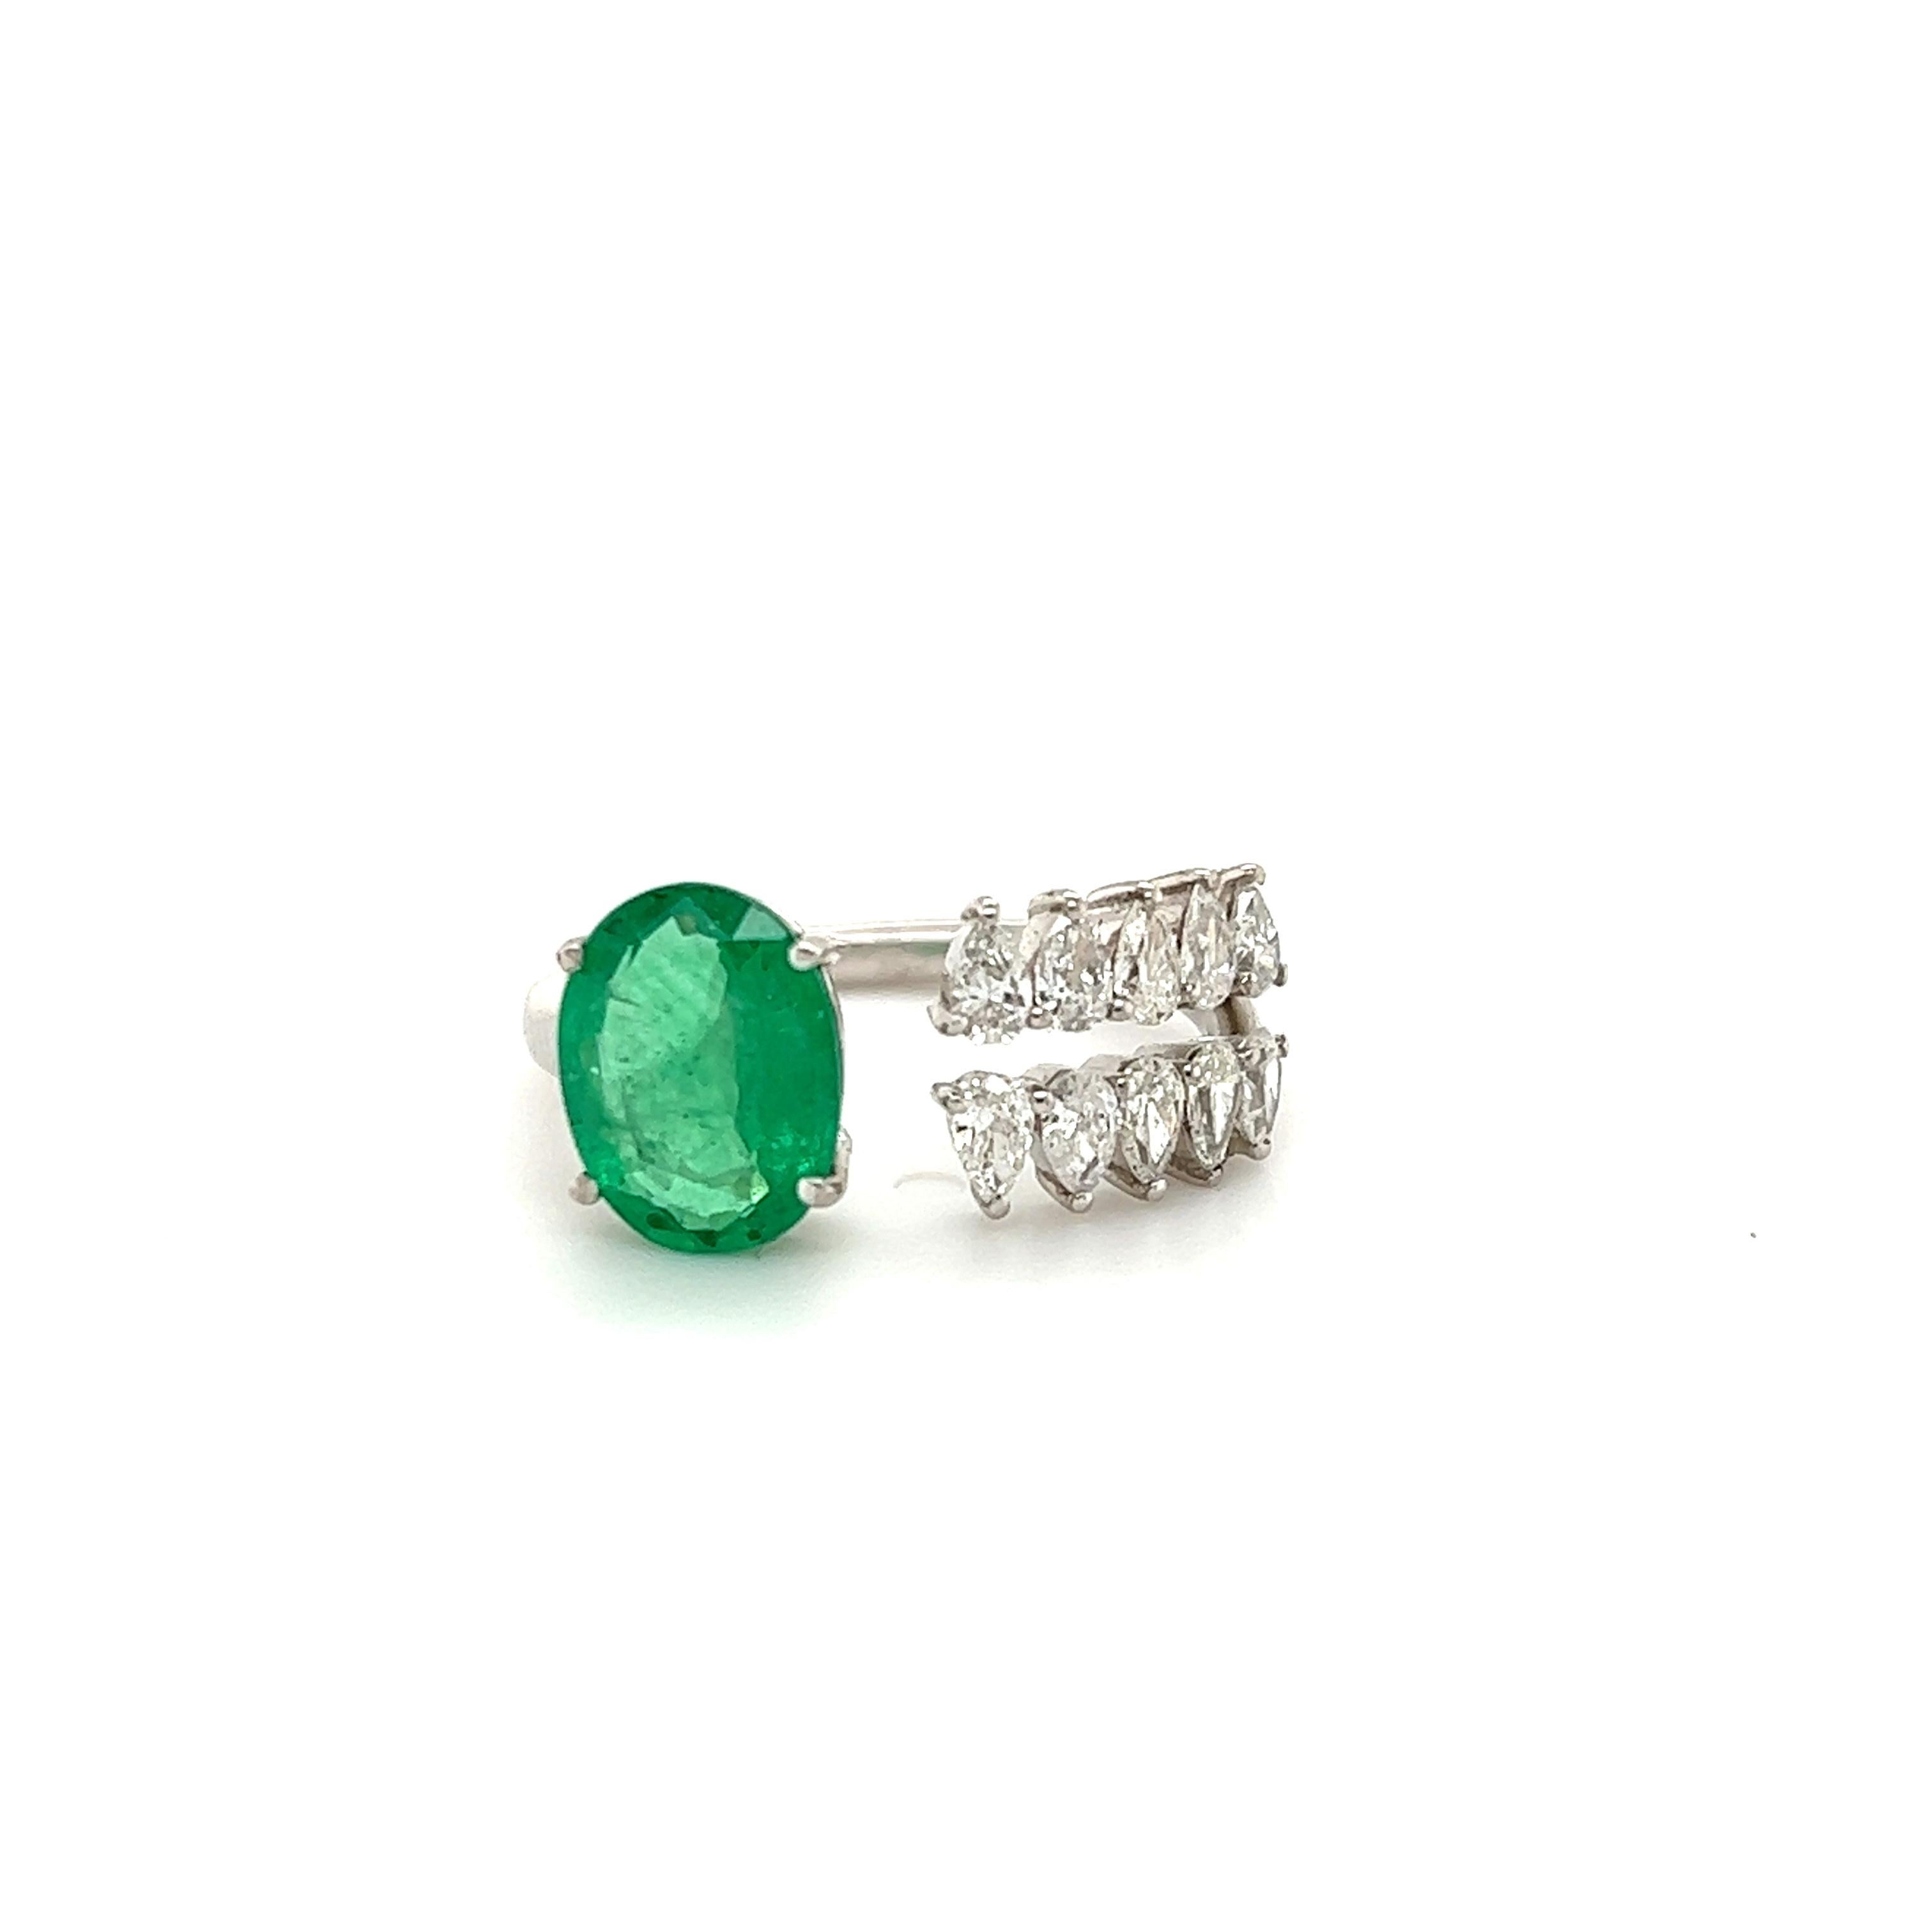 Gorgeous design seen on this ring crafted in 18k white gold. This fantastic design shows pear shape natural diamonds and one vibrant colored green emerald in a oval shape.  The ring is crafted as an open design by-pass ring with diamonds on one side